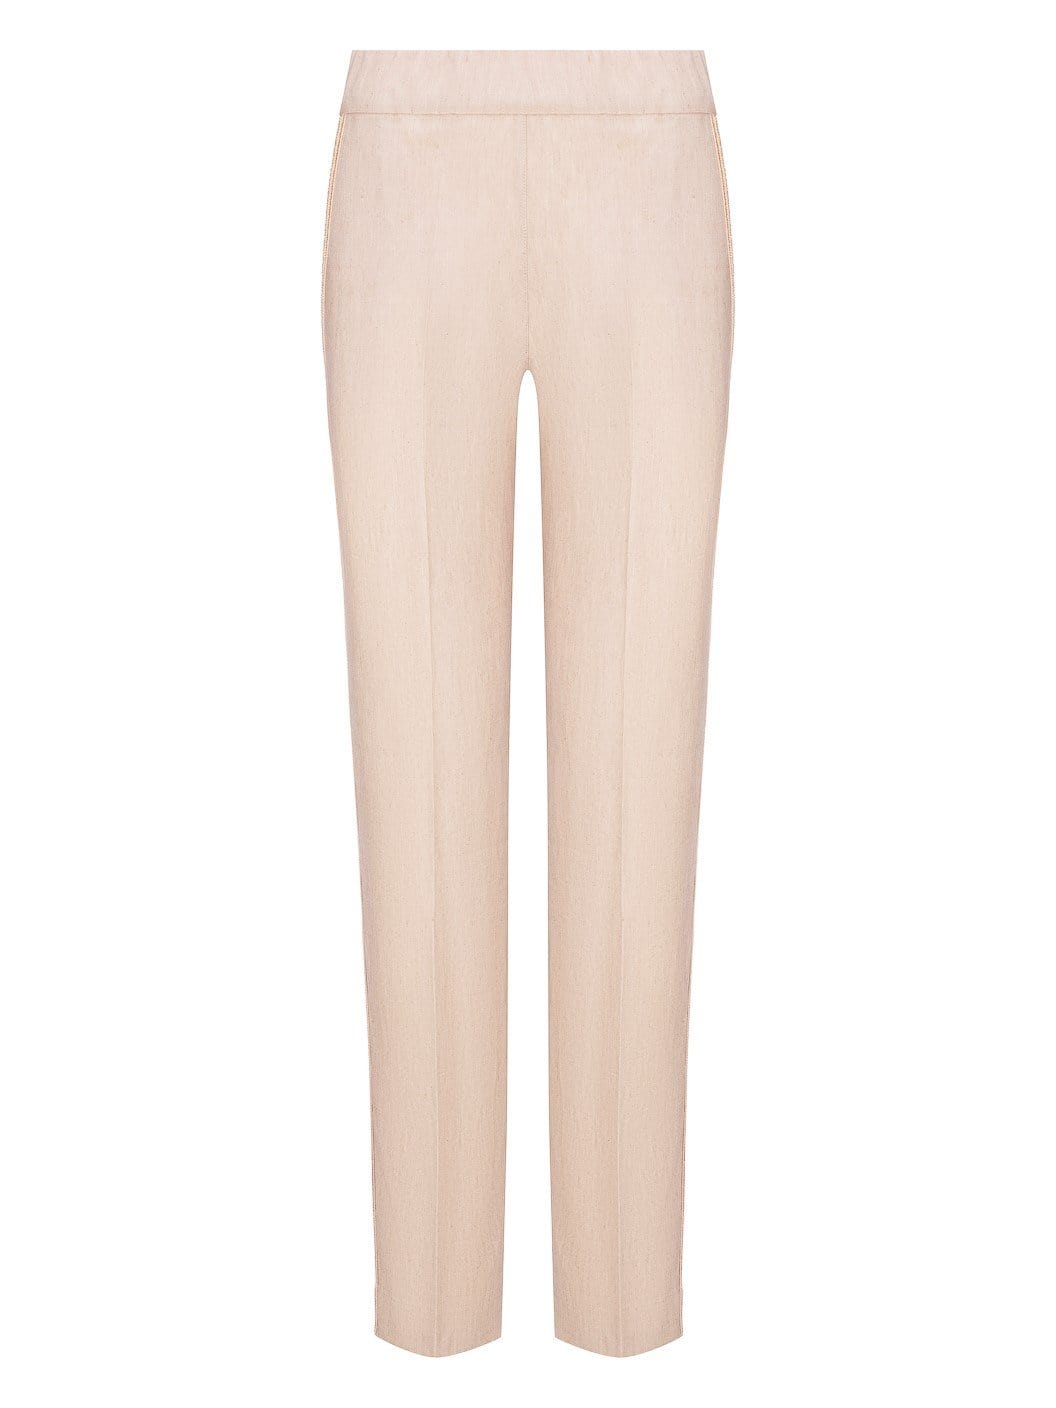 D.Exterior Trousers D.Exterior Stone Linen Trousers With Side Braid Detail 50613 izzi-of-baslow